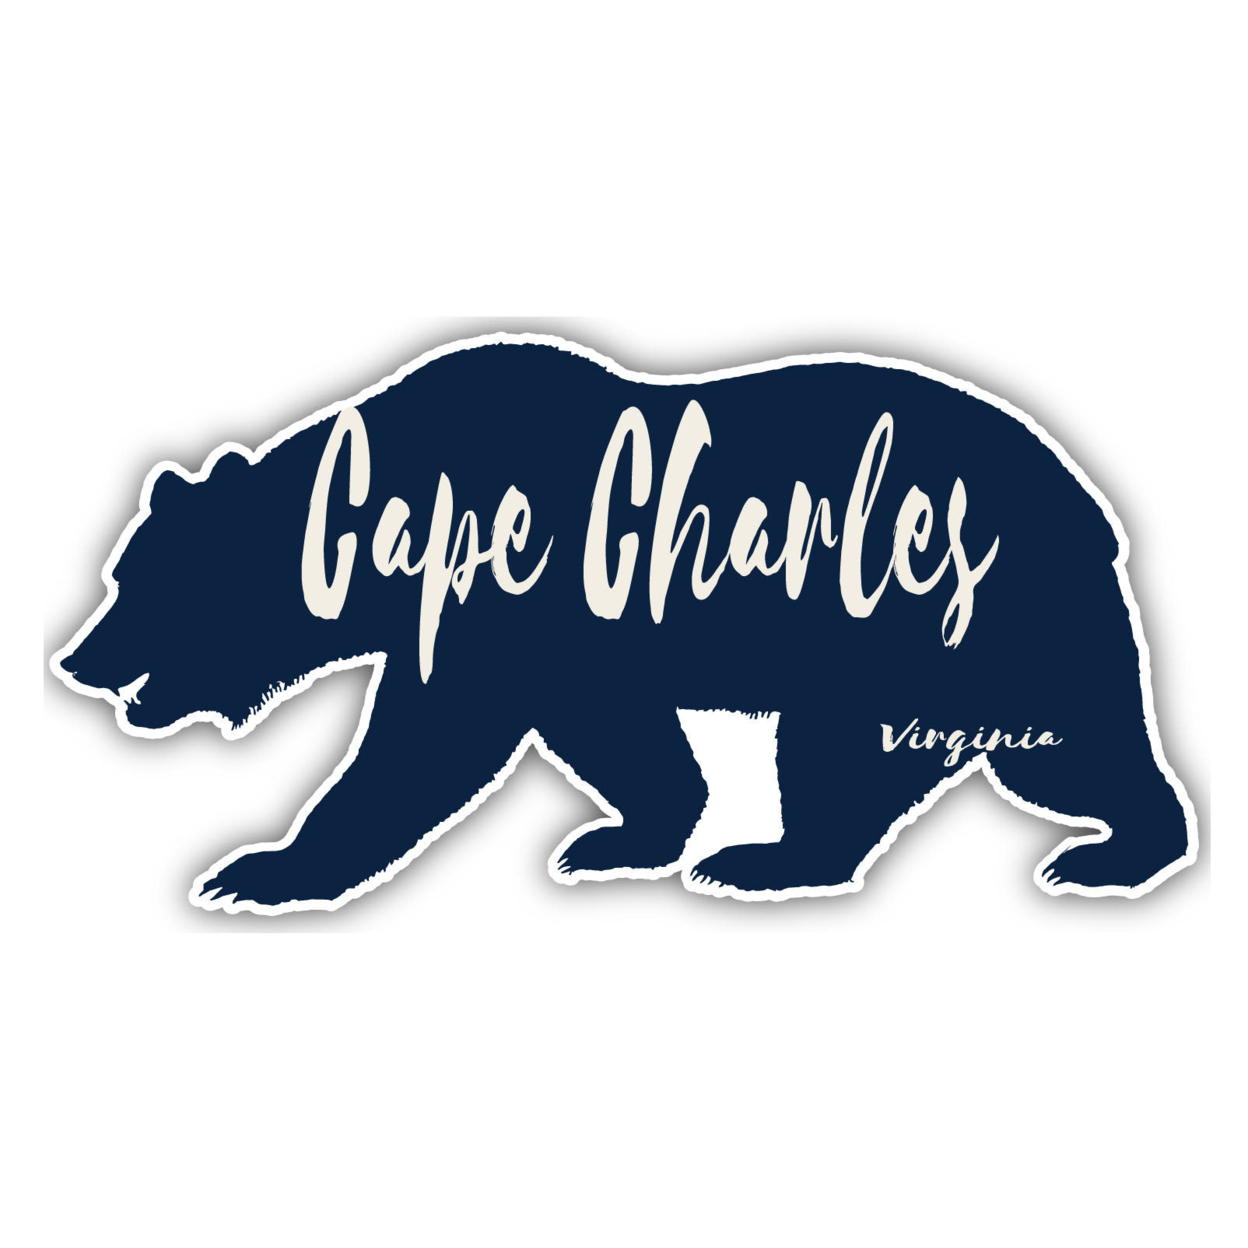 Cape Charles Virginia Souvenir Decorative Stickers (Choose Theme And Size) - 4-Pack, 2-Inch, Camp Life